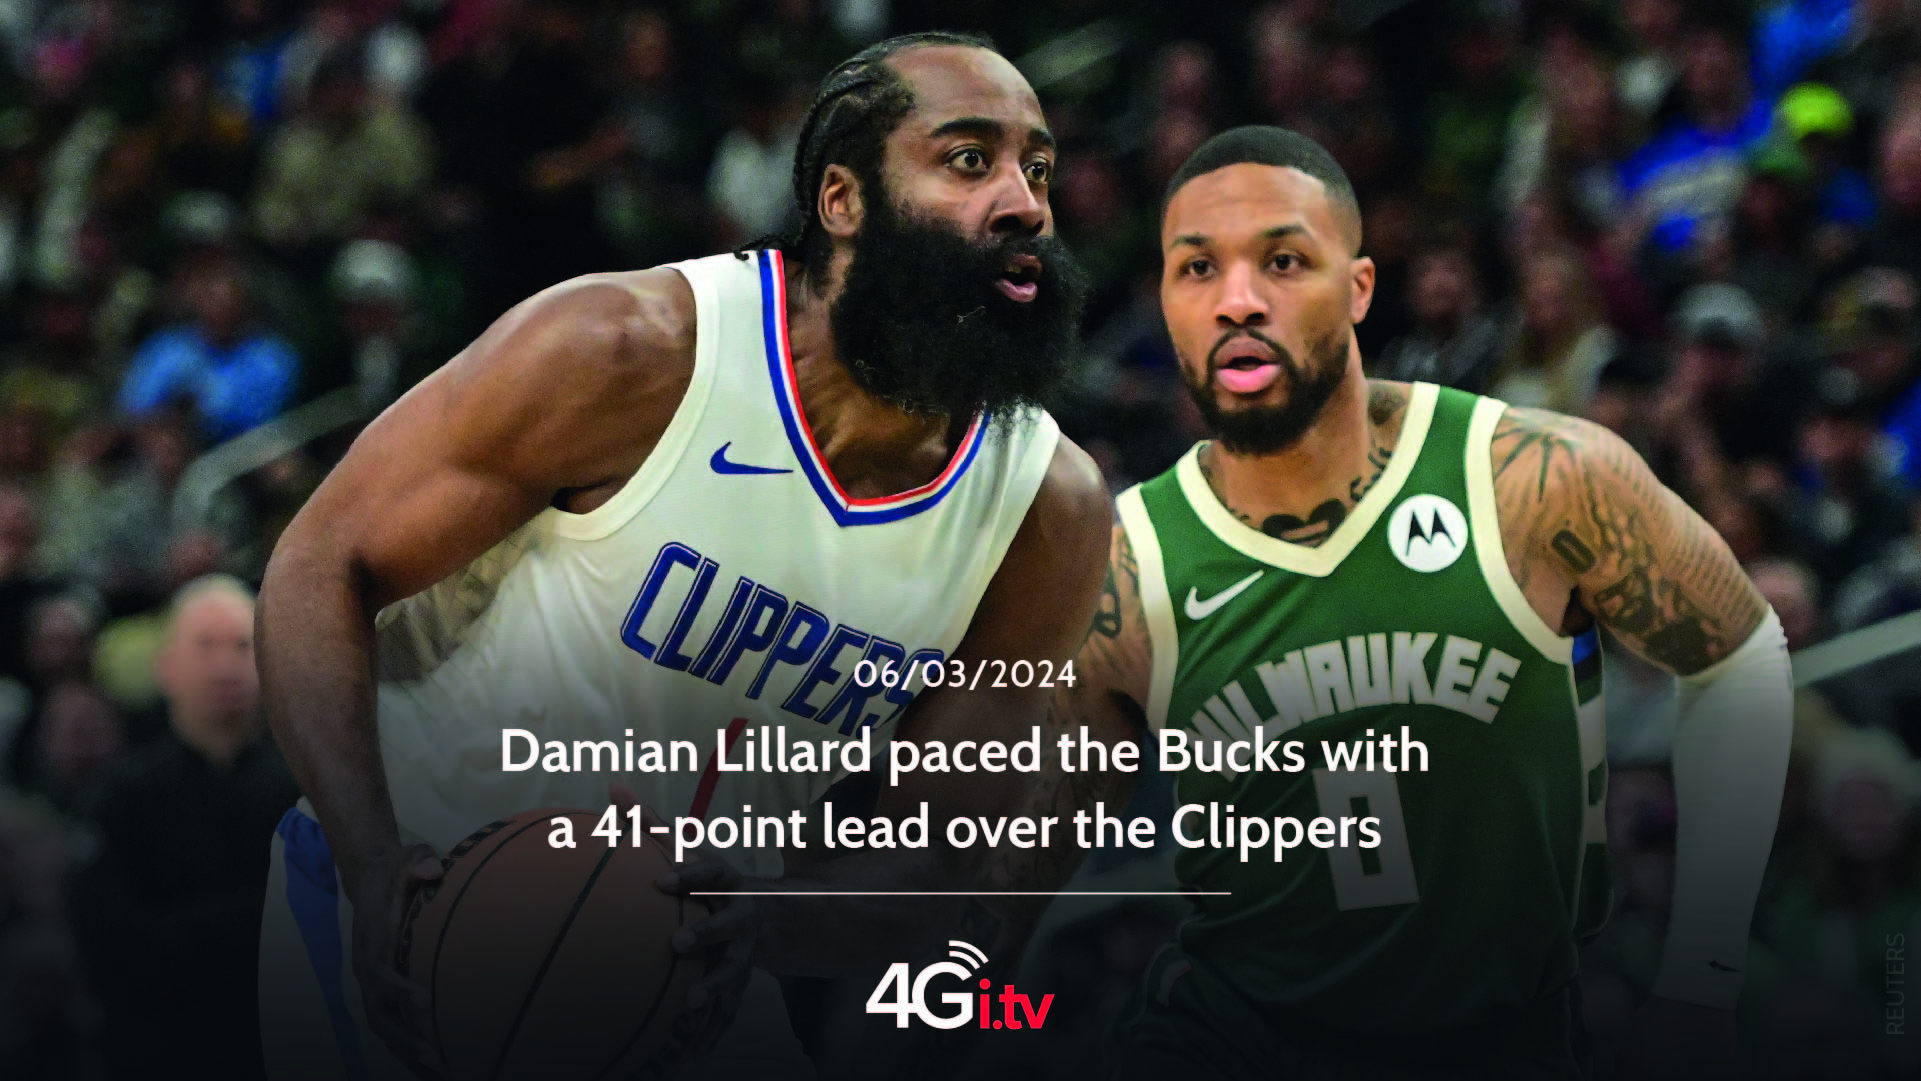 Подробнее о статье Damian Lillard paced the Bucks with a 41-point lead over the Clippers